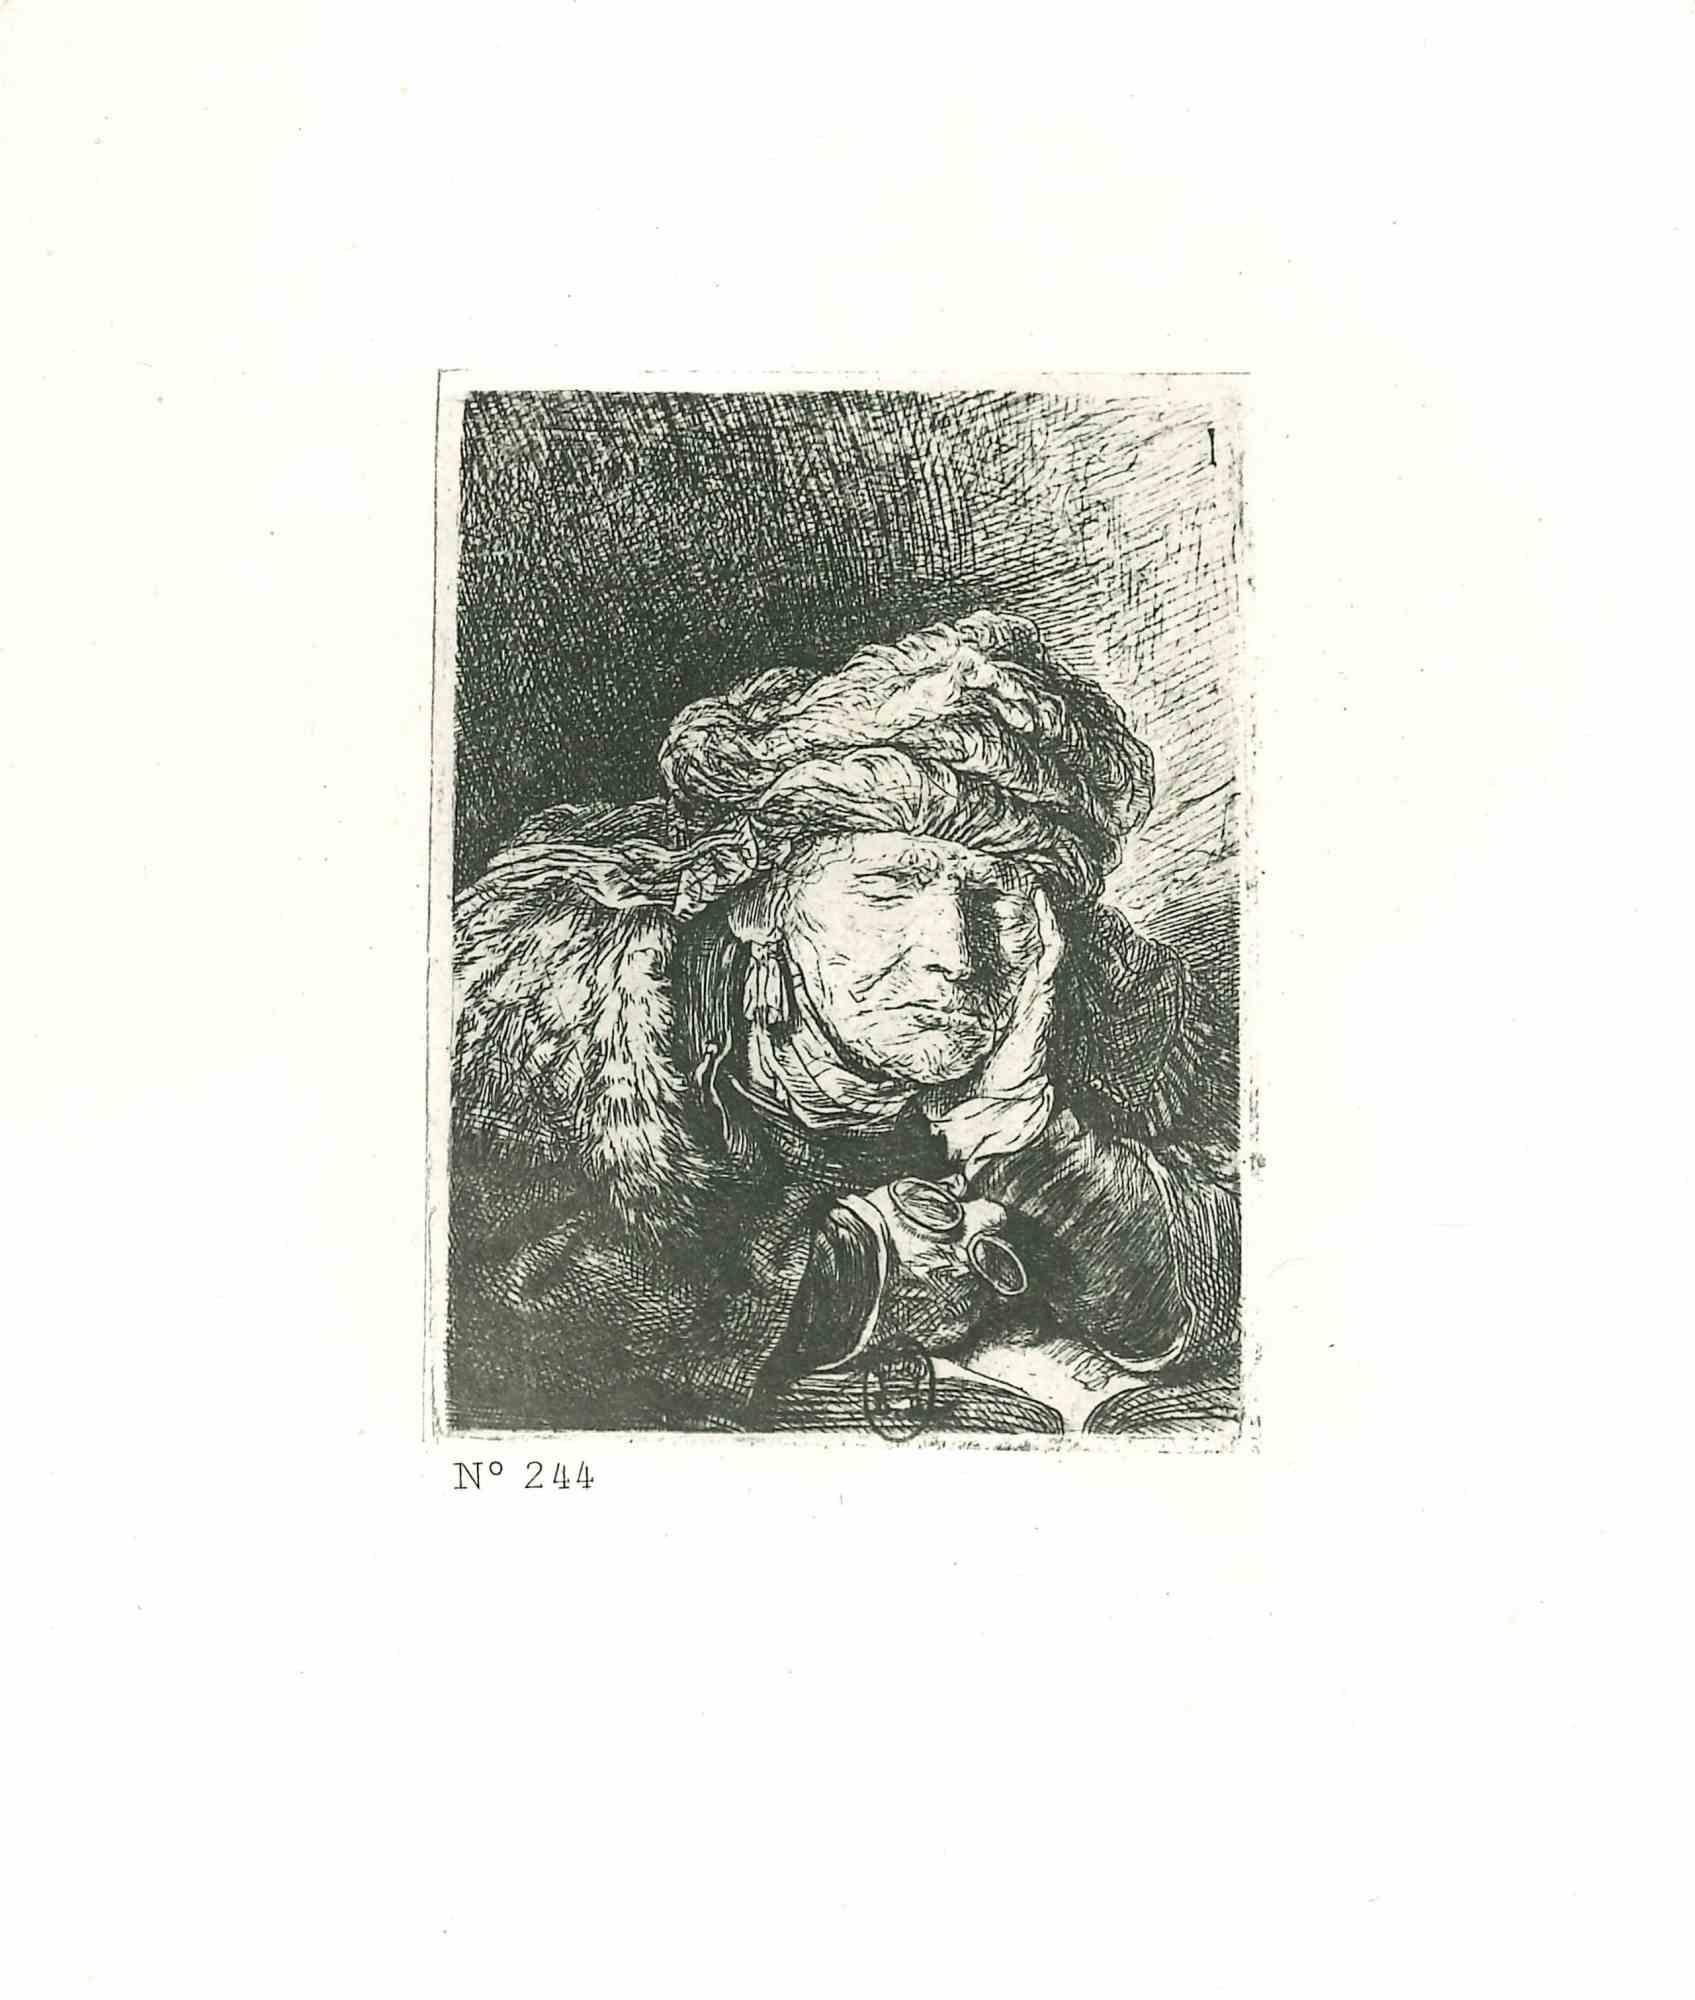 Charles Amand Durand Figurative Print - Old Woman Sleeping - Engraving after Rembrandt - 19th Century